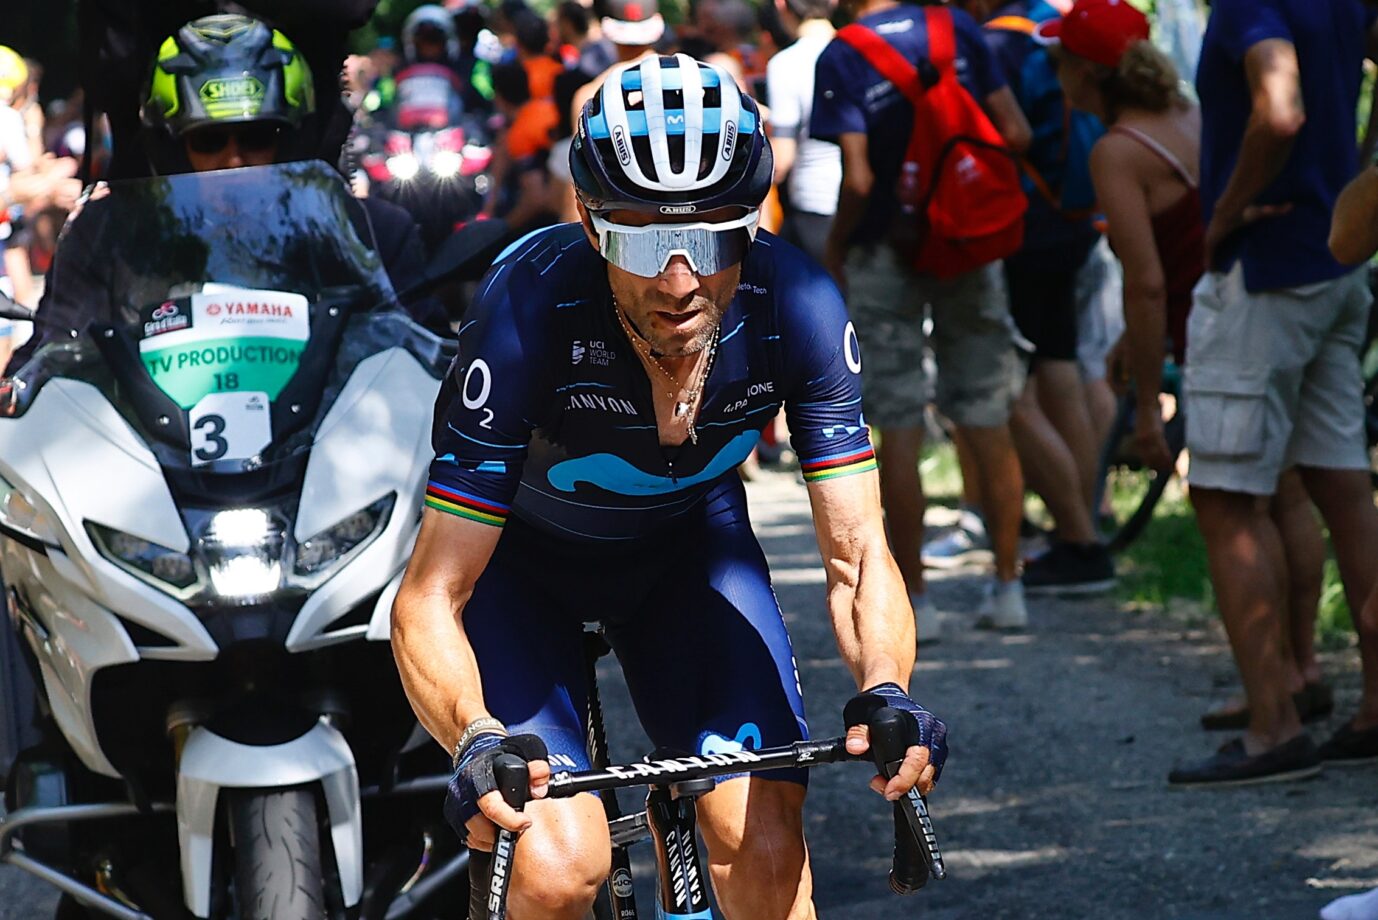 Mechanical incident sets Valverde -12th in Torino- out of Giro GC fight